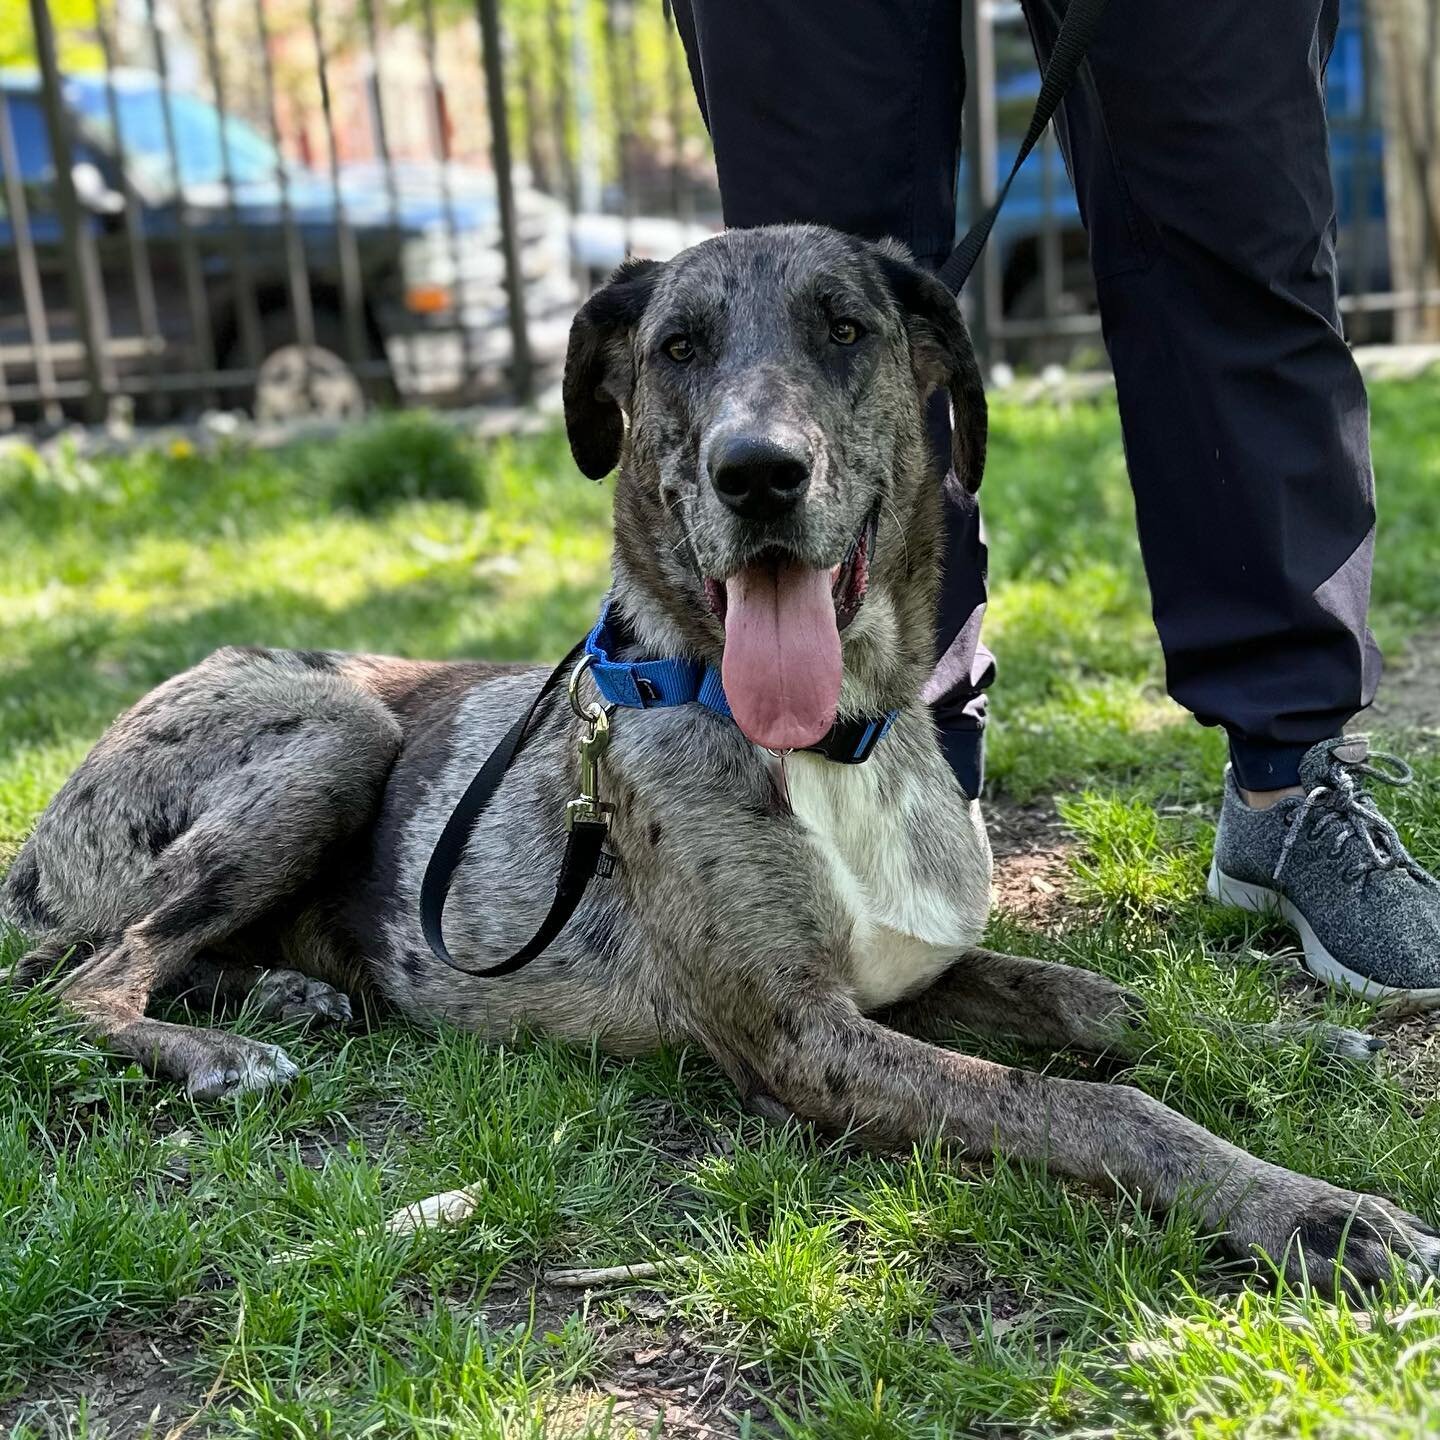 Meet 2 year old Hane the Dane (mix)!💙

This sweet boy was dropped off at boarding playgroup and never picked up! If you can imagine anyone abandoning such a sweet and good boi....
No matter because their loss is definitely someone else's gain!

His 